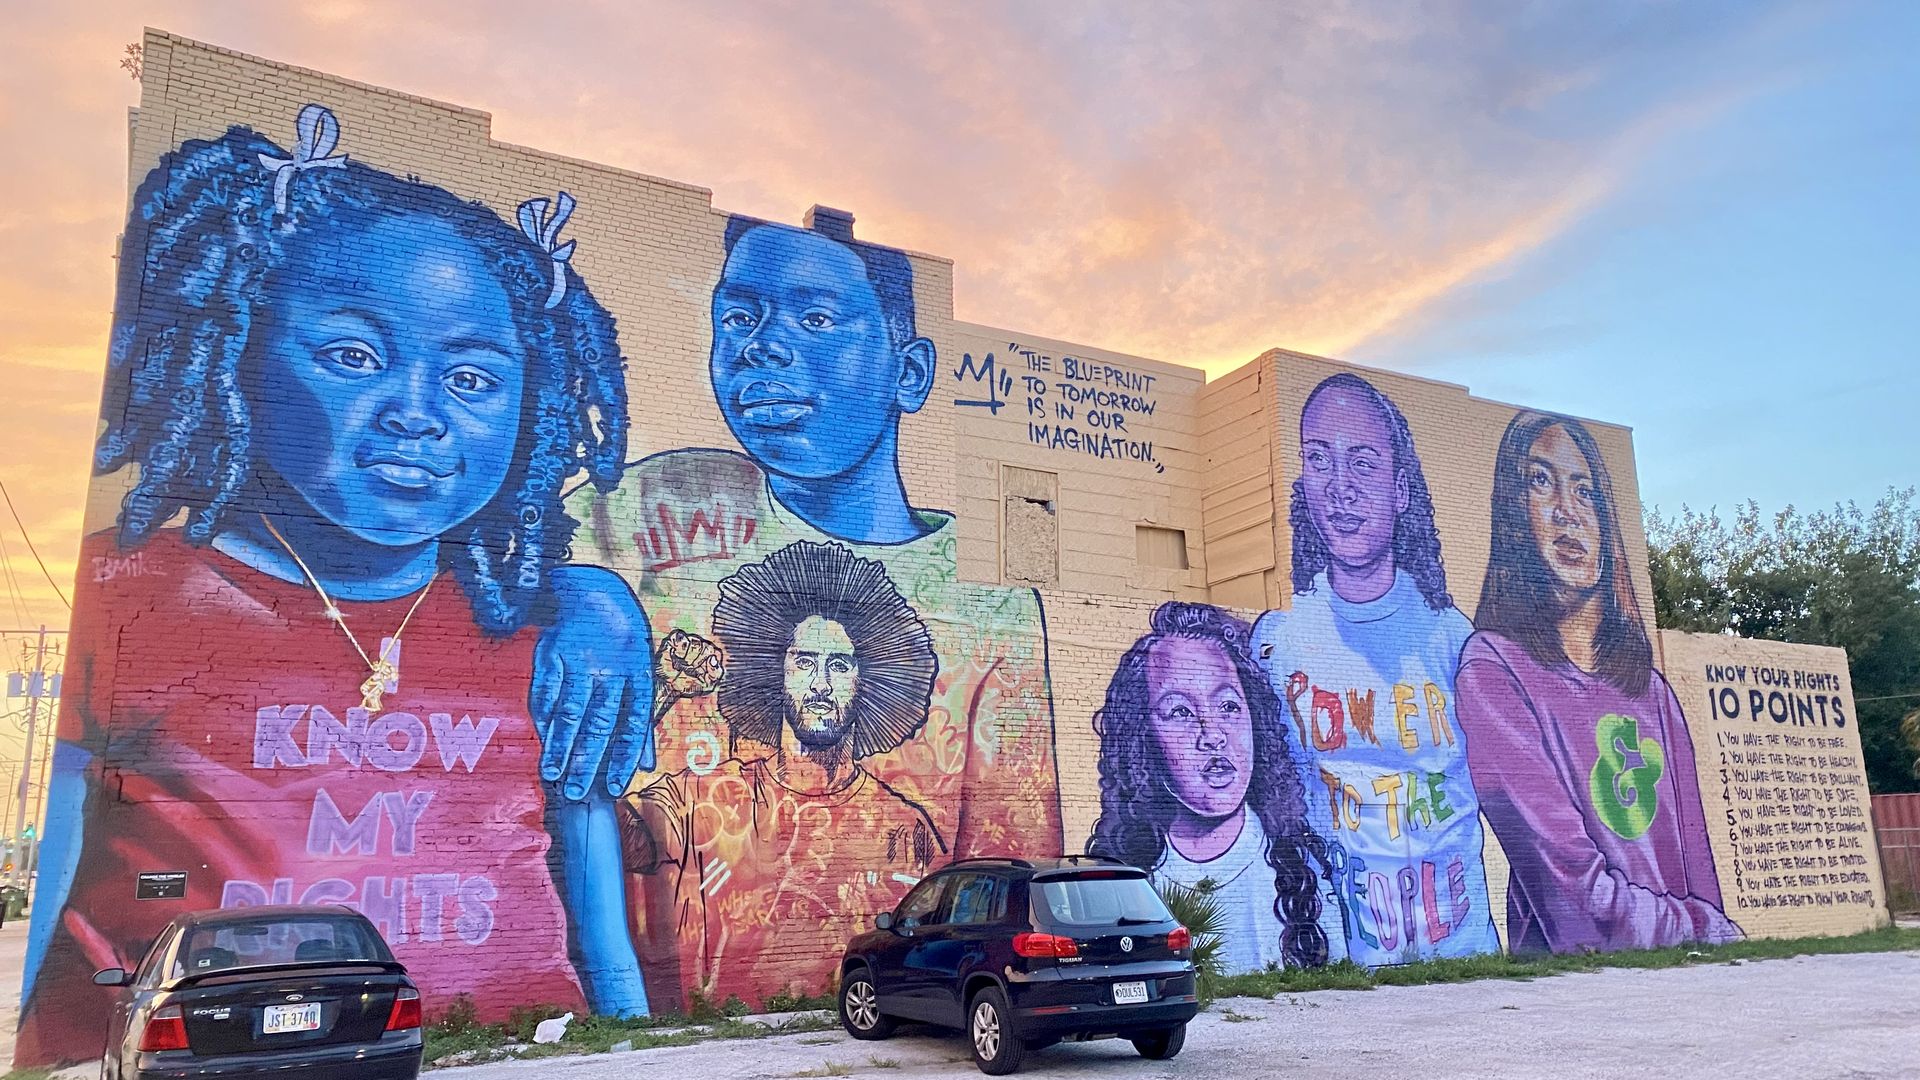 A mural on the side of a building in Tampa